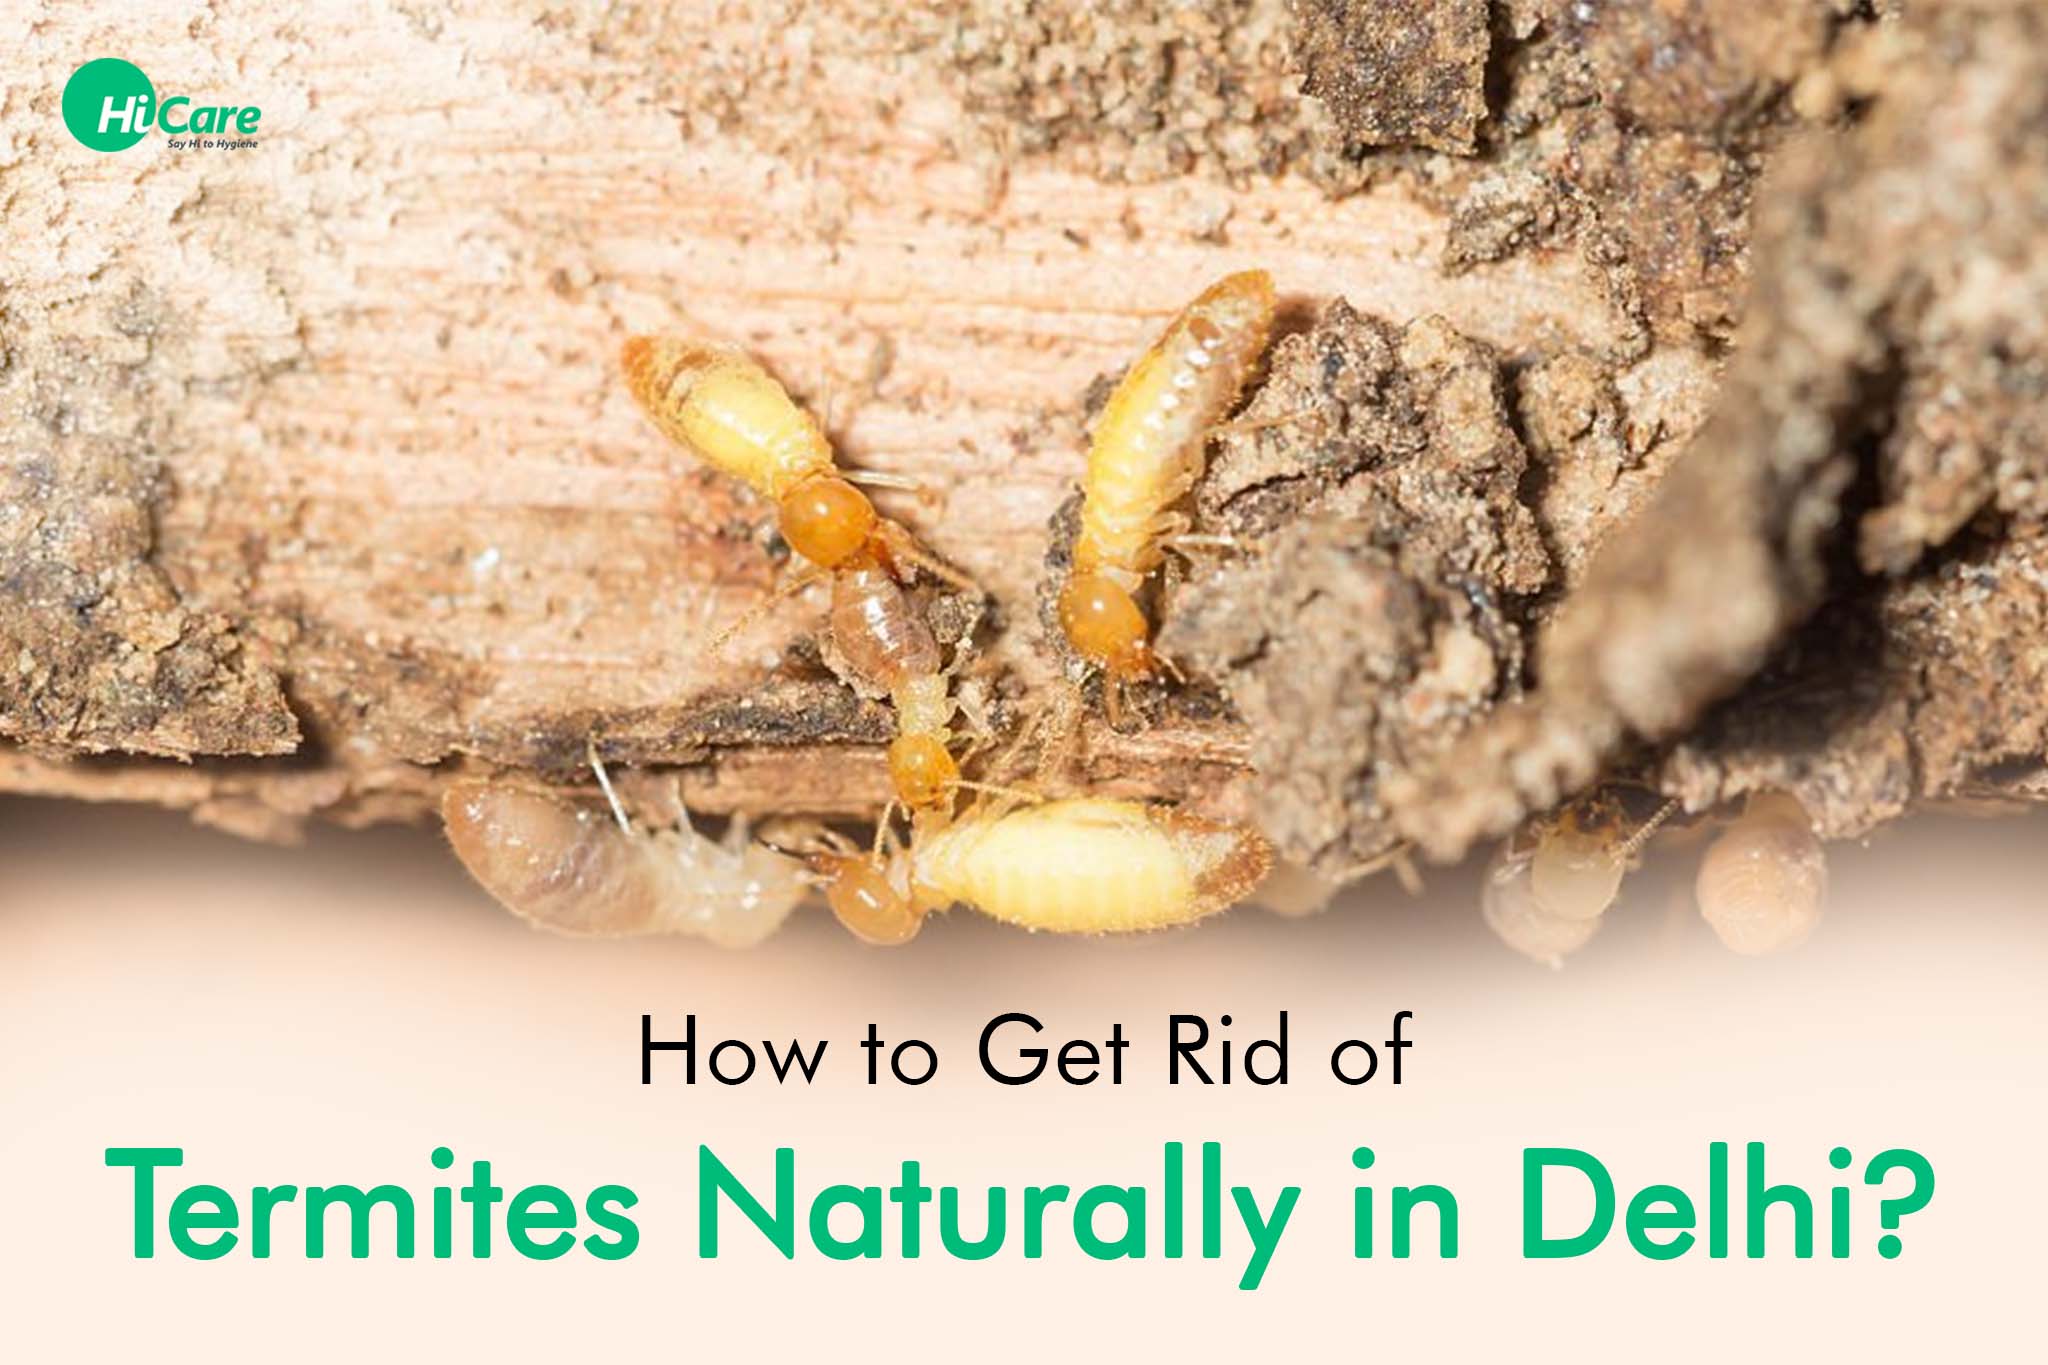 How to Get Rid of Termites Naturally in Delhi?